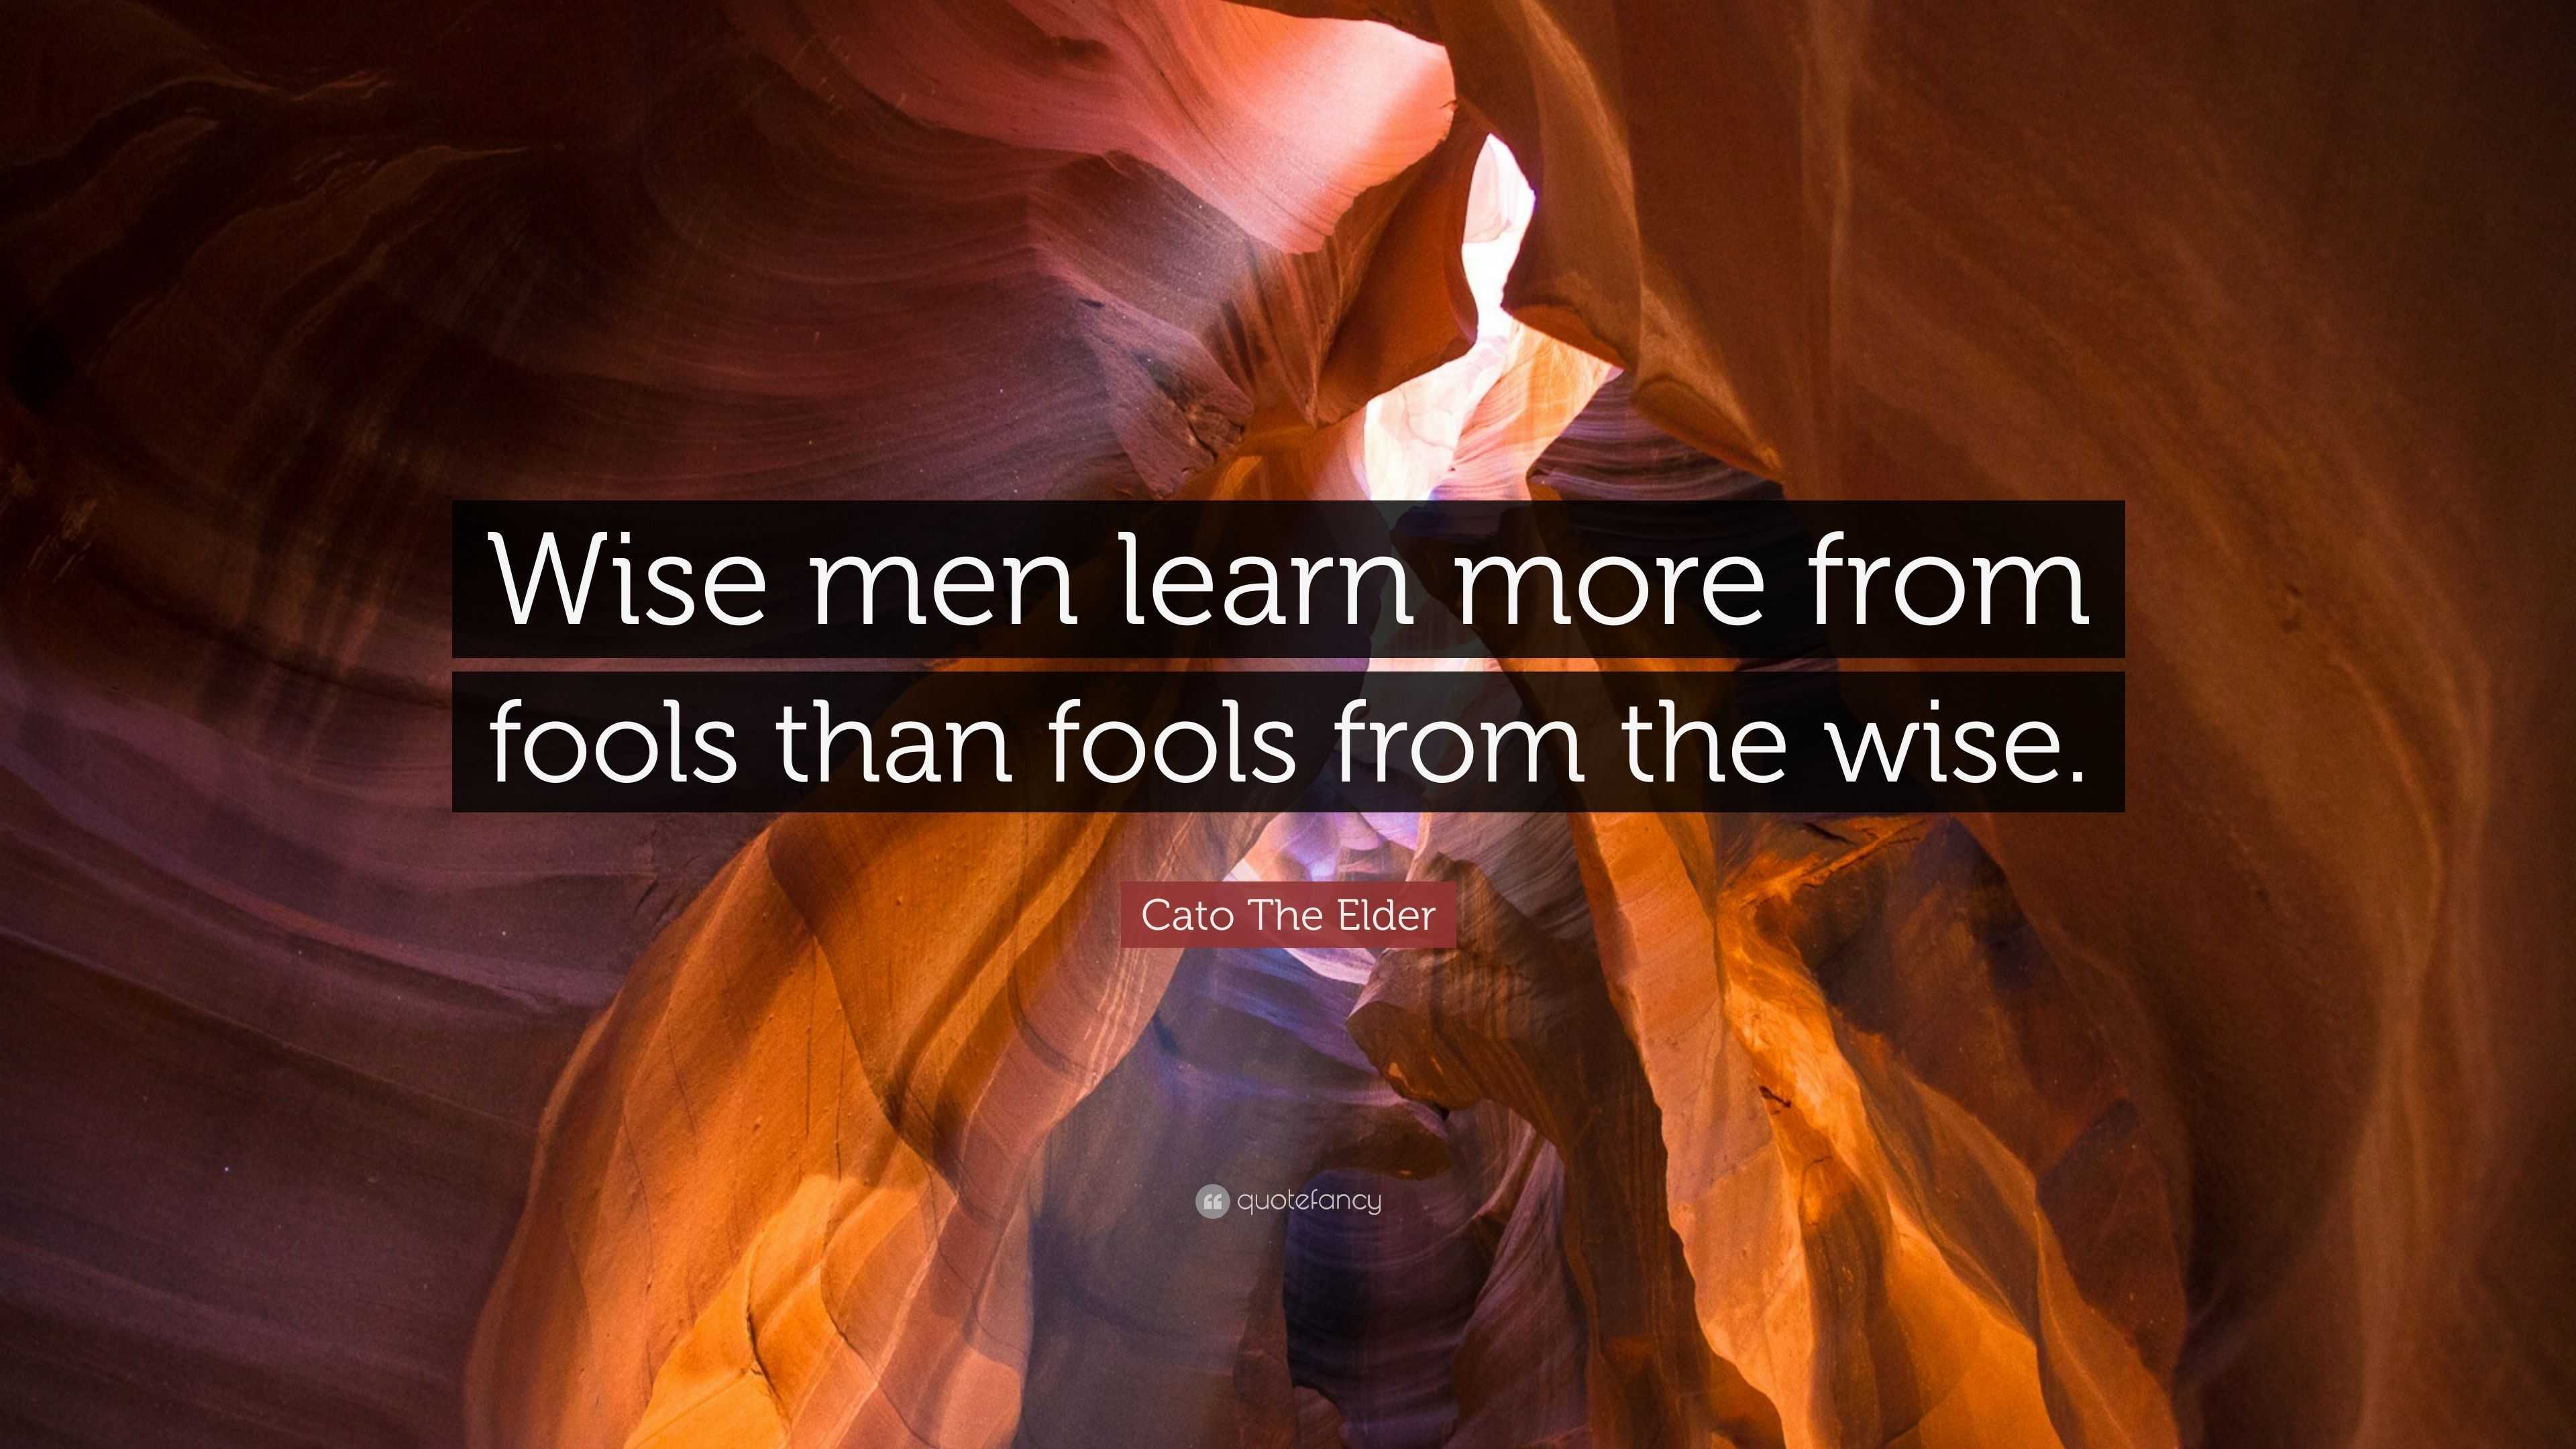 Cato The Elder Quote “wise Men Learn More From Fools Than Fools From The Wise” 8384